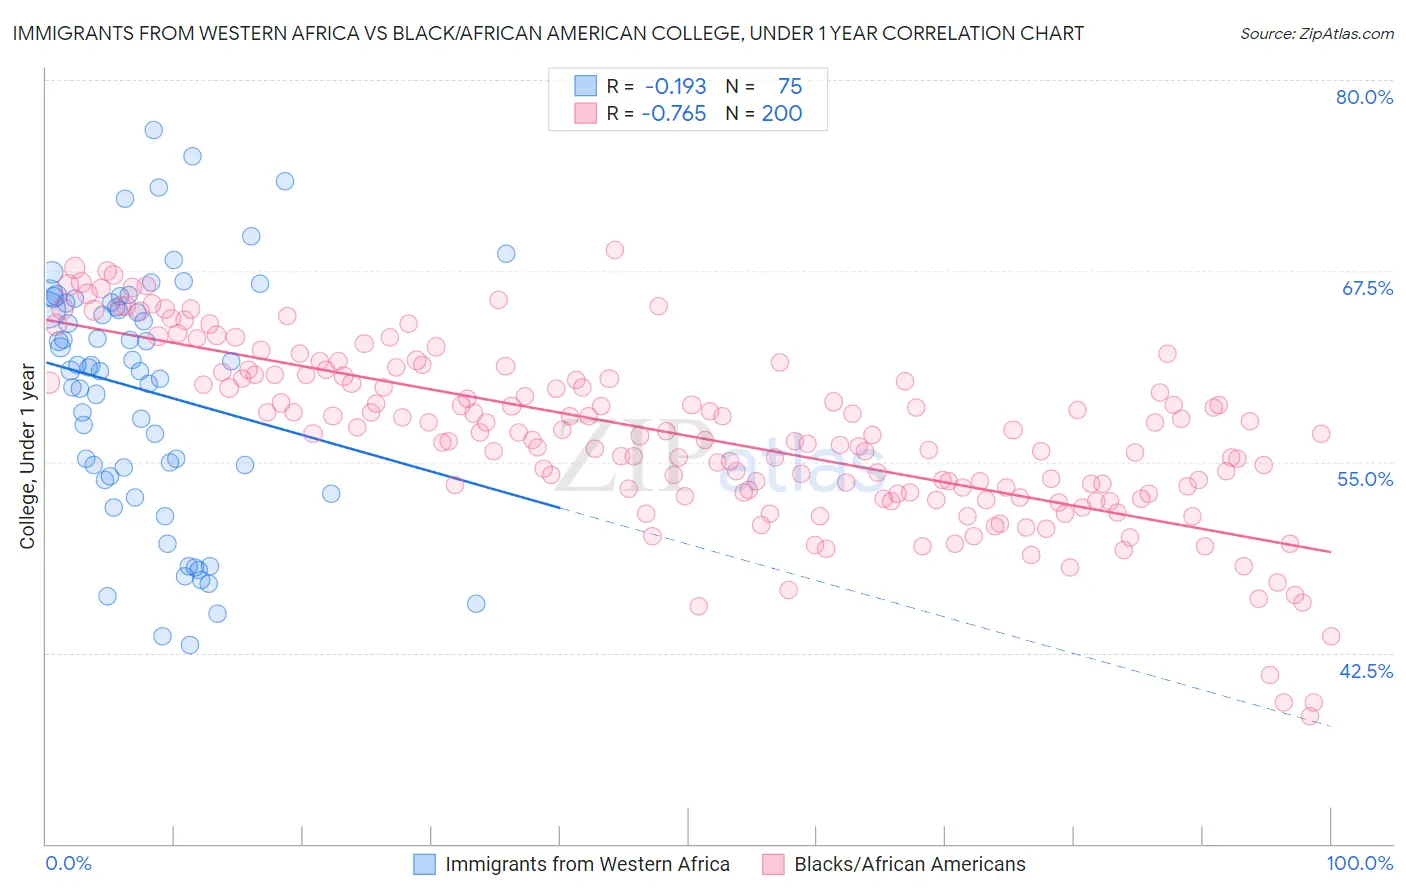 Immigrants from Western Africa vs Black/African American College, Under 1 year